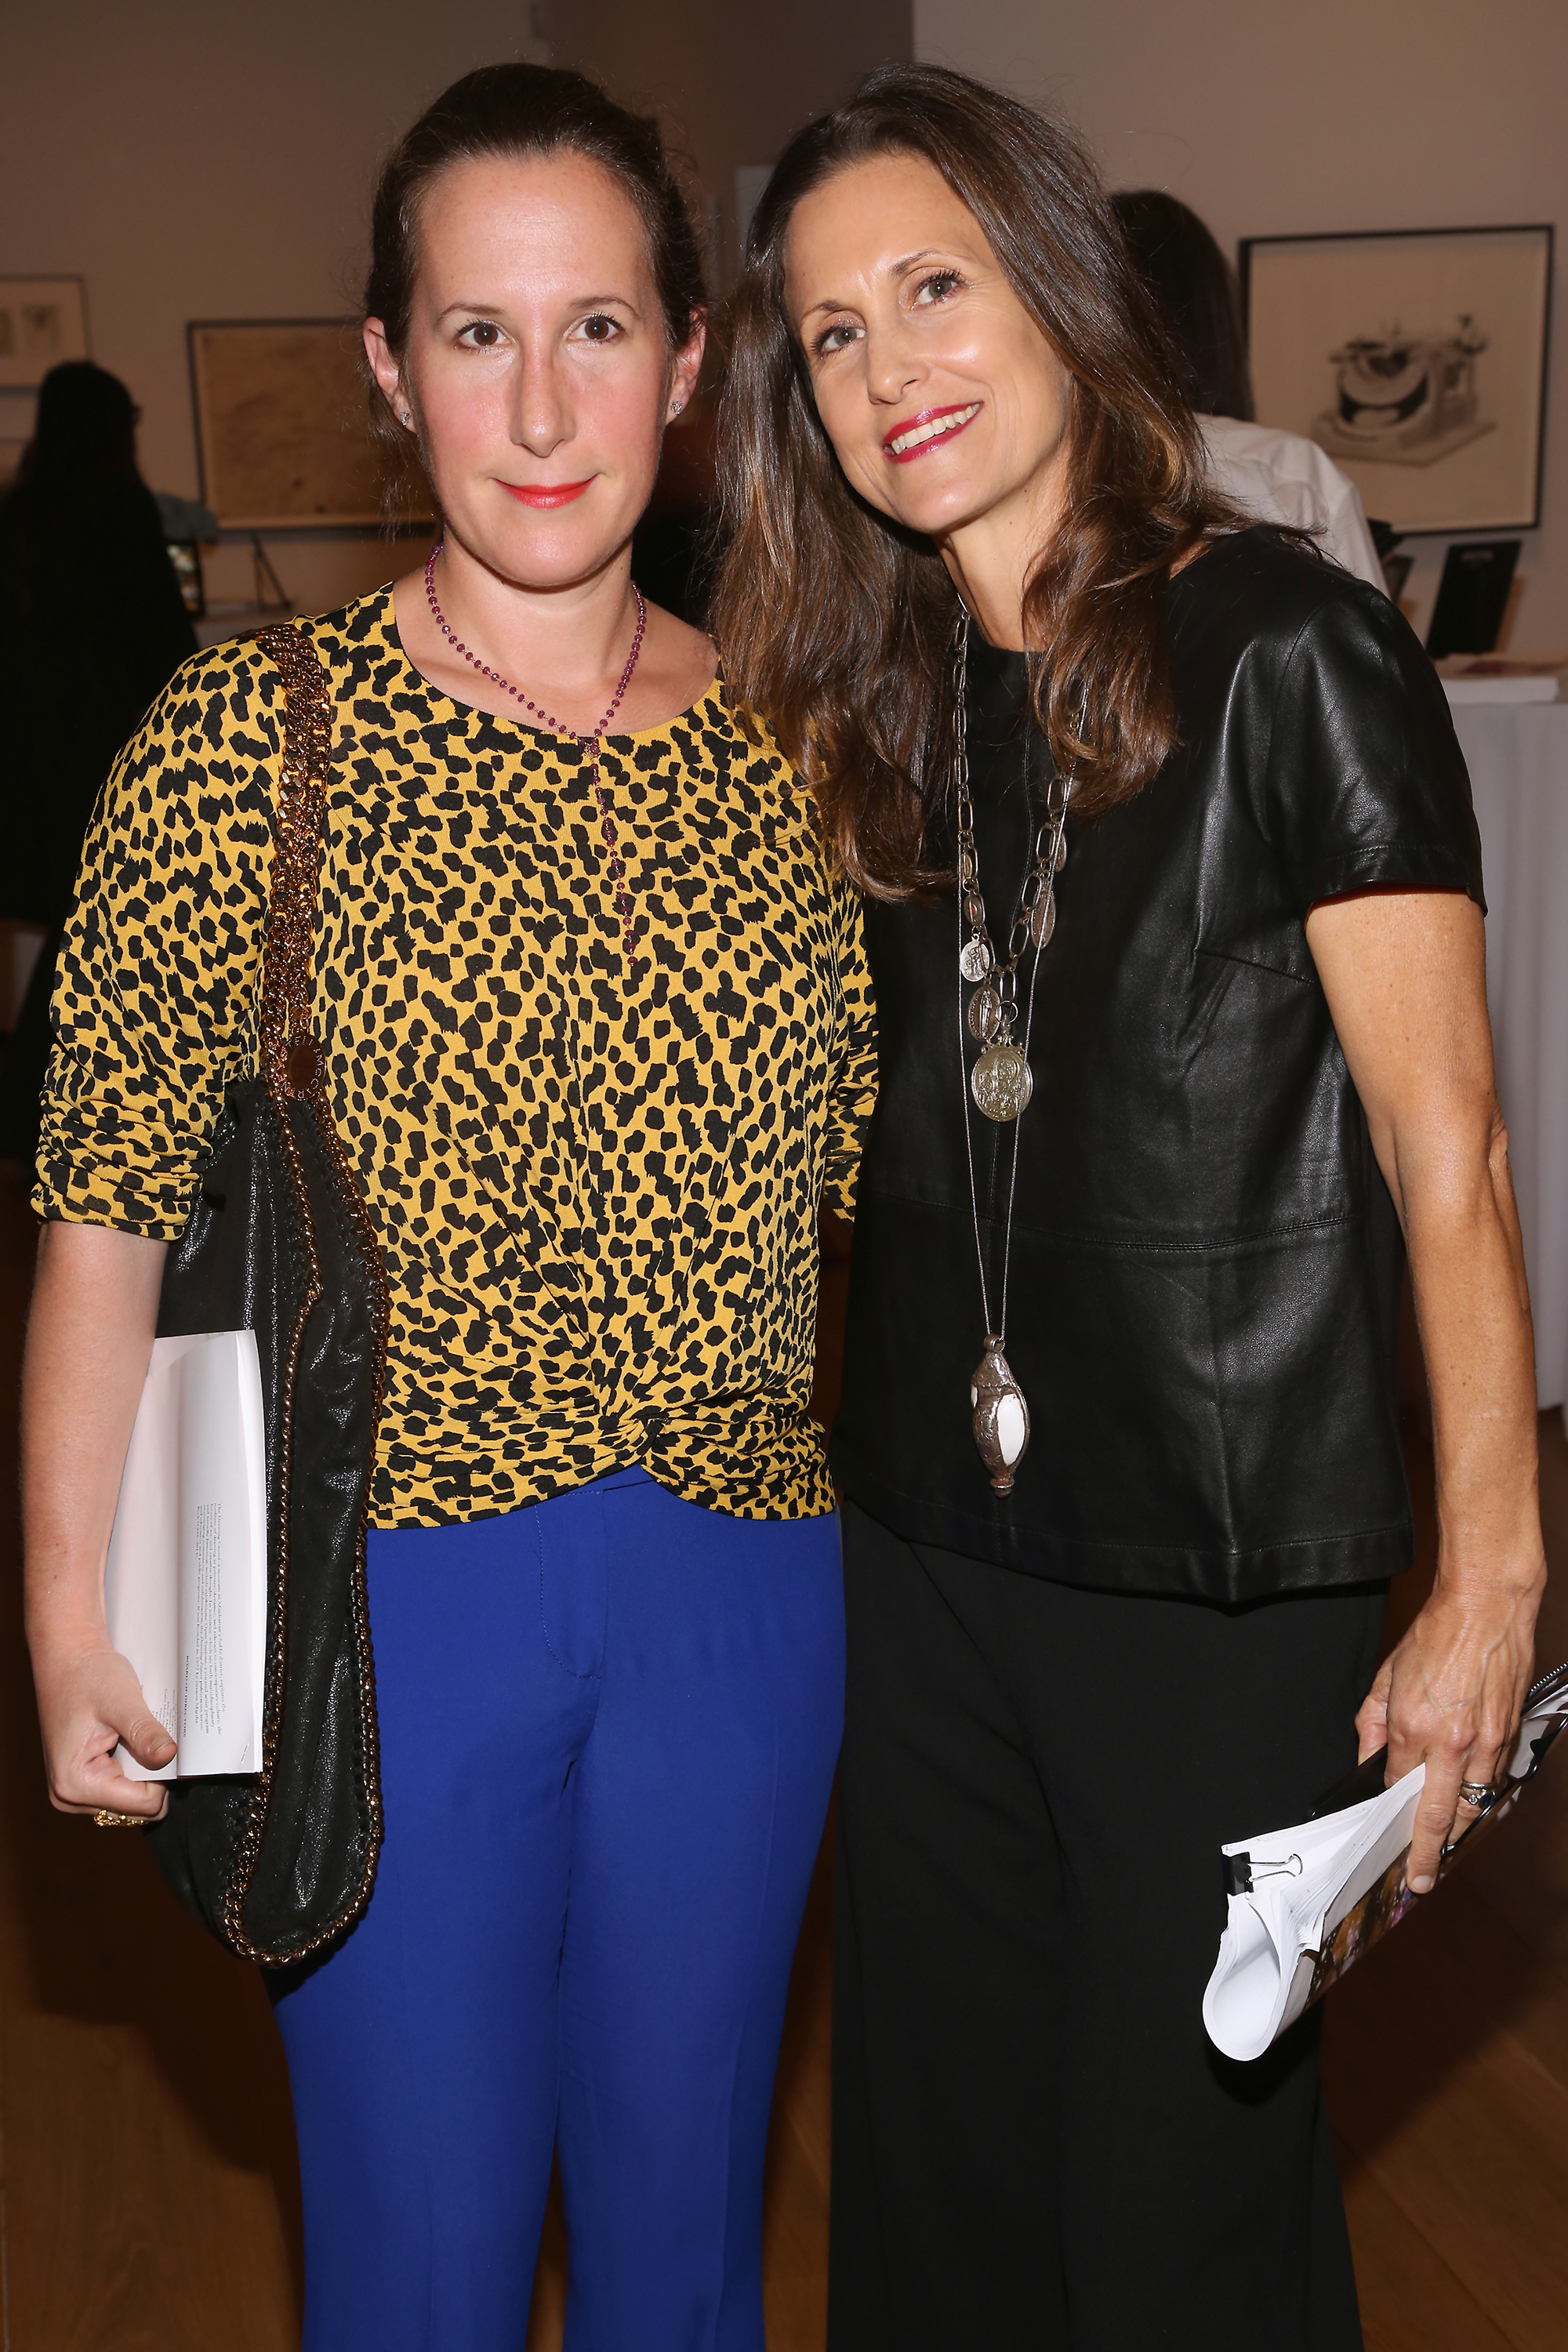 Natalie Frank and Aimee Good at the Drawing Center Annual Benefit Auction. Courtesy of photographer Sylvain Gaboury, © Patrick McMullan.